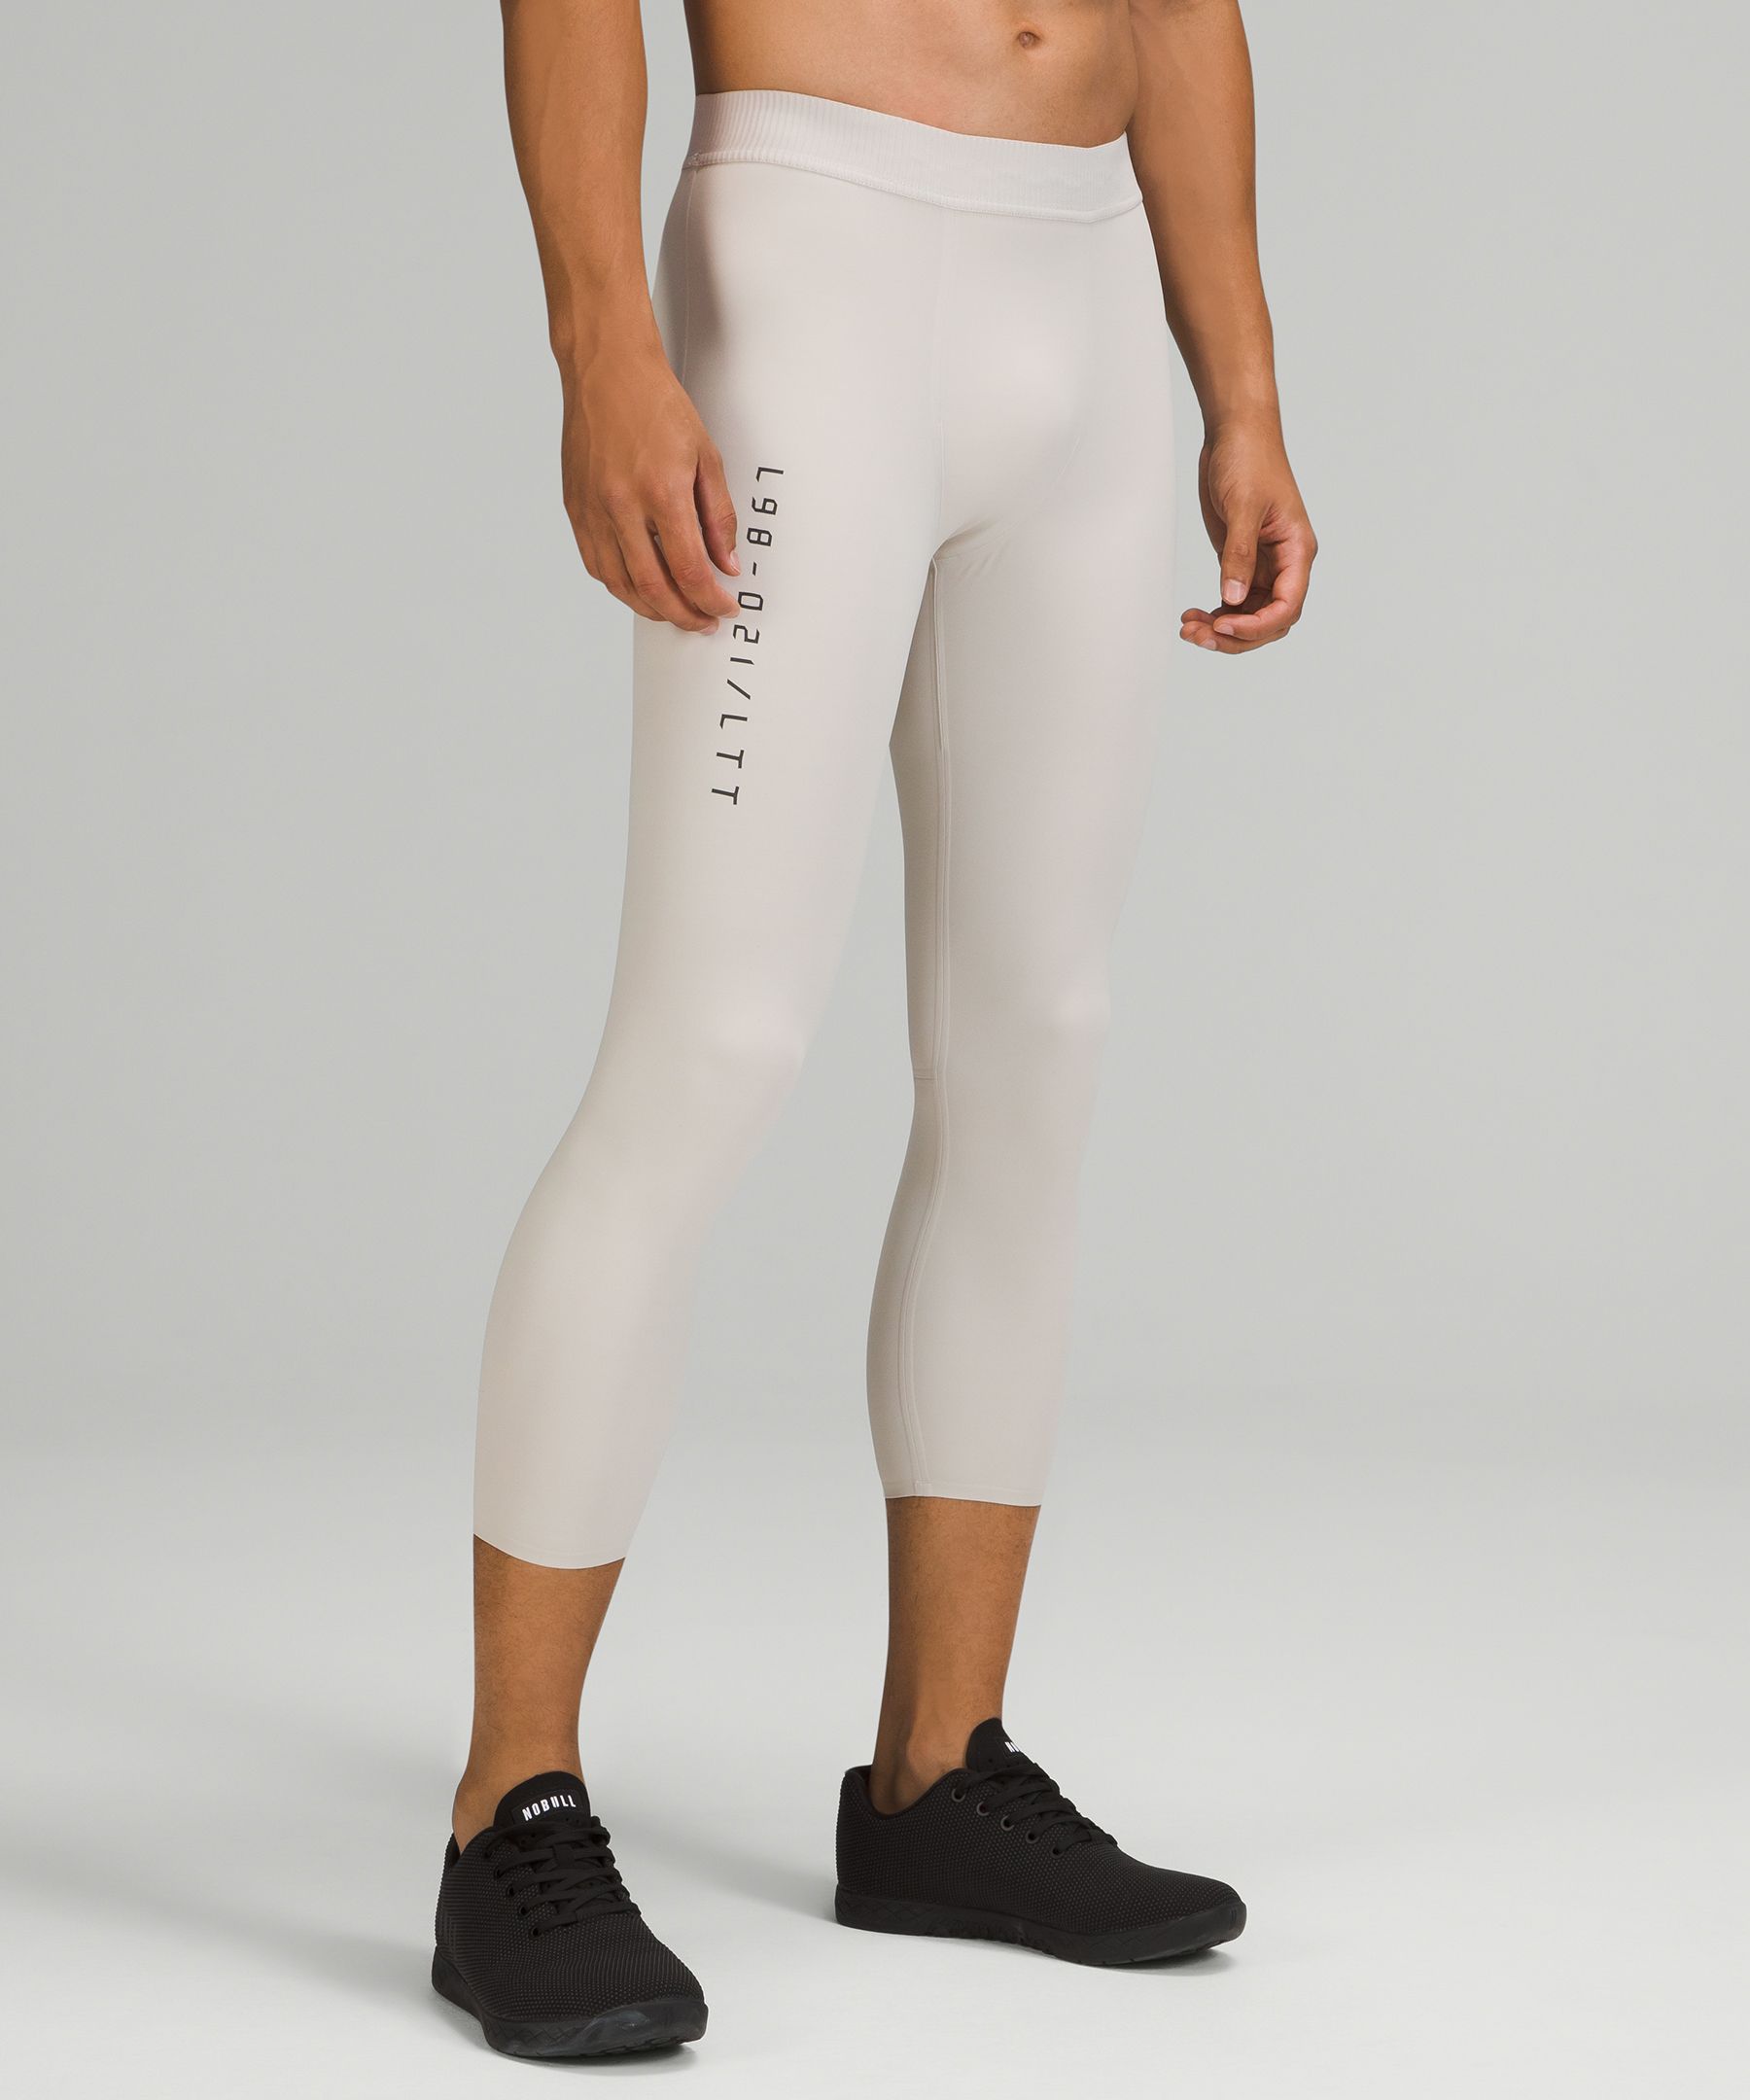 Lululemon White/Grey Leaf Print Vented Leggings- Size 4 (Inseam 23.5) –  The Saved Collection